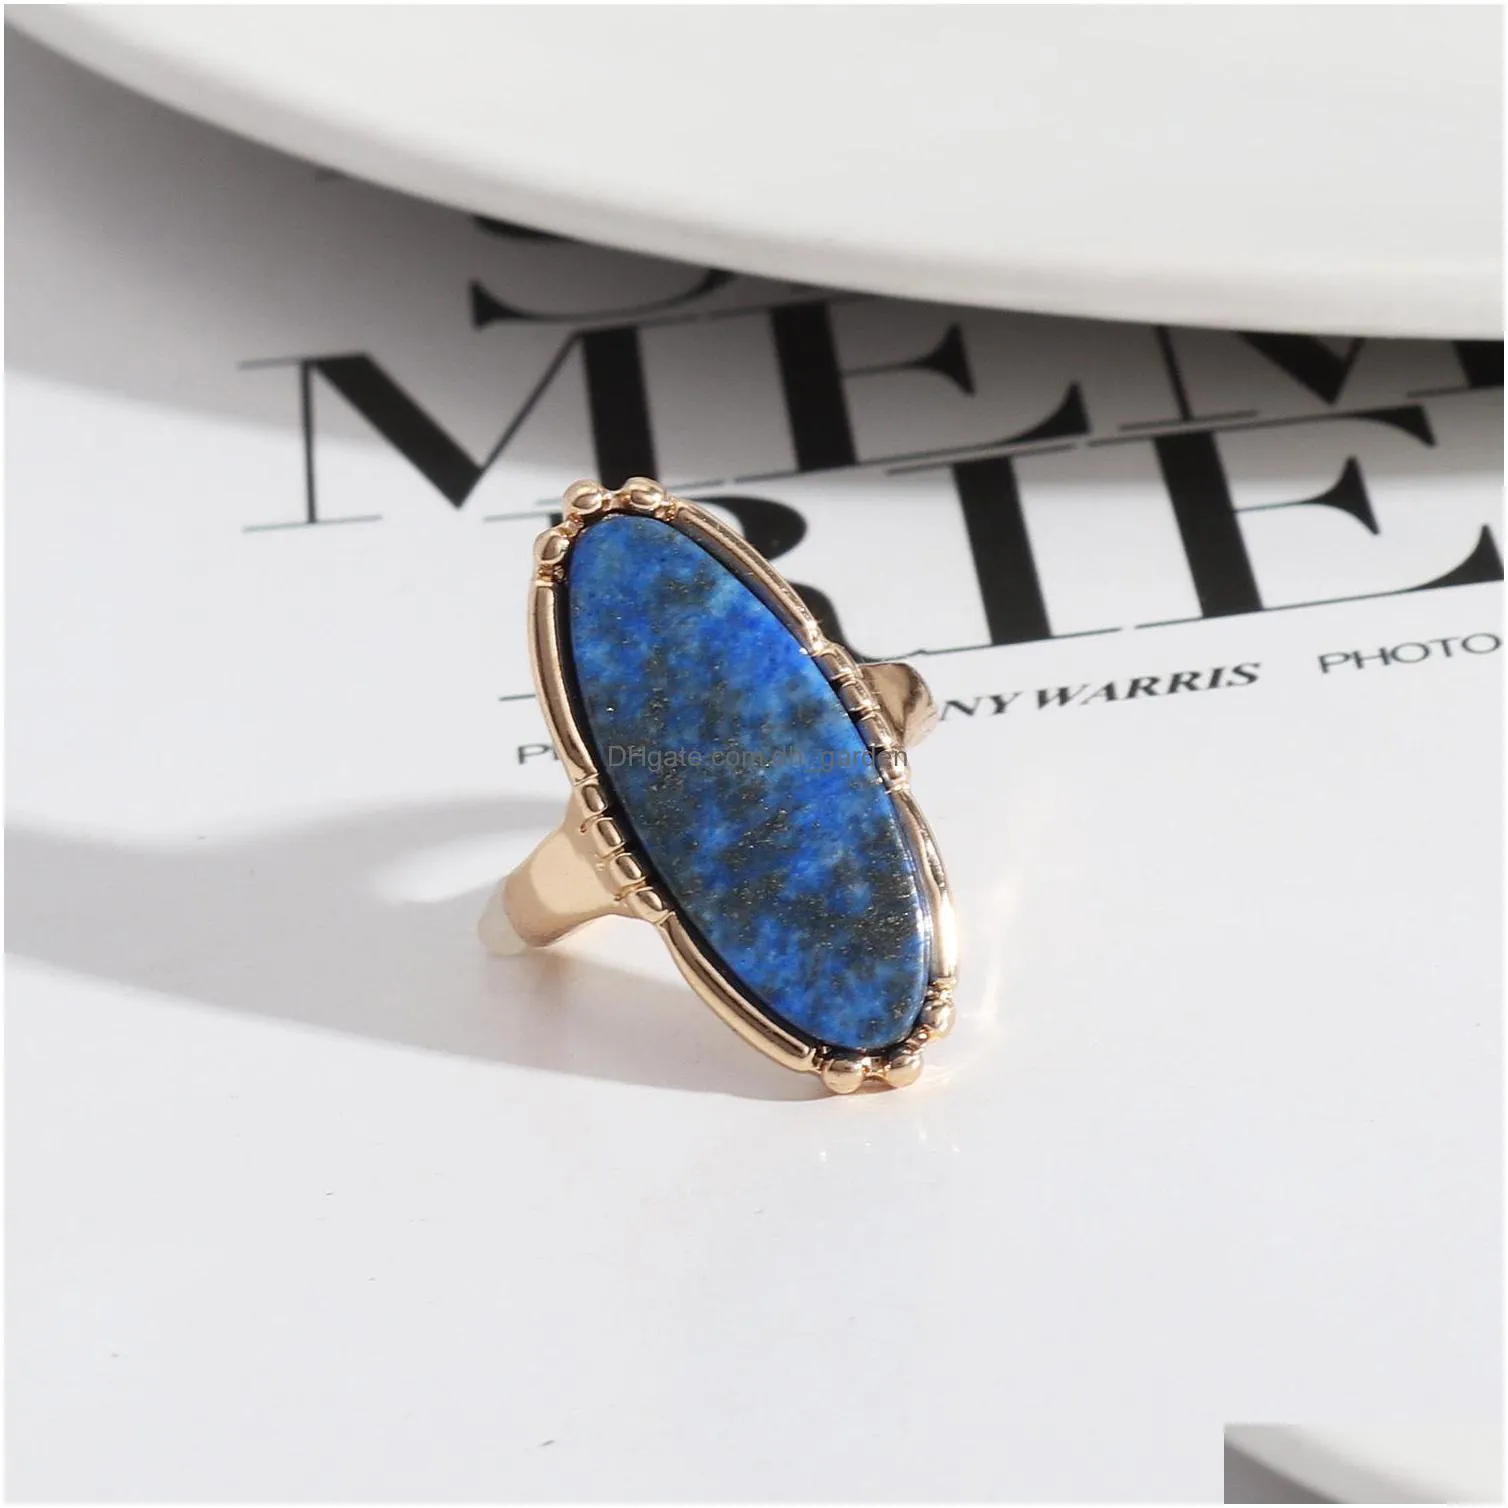 gold oval turquoise lapis lazuli blue natural stone rings fashion inner dia 1.7cm gold color band jewelry for women